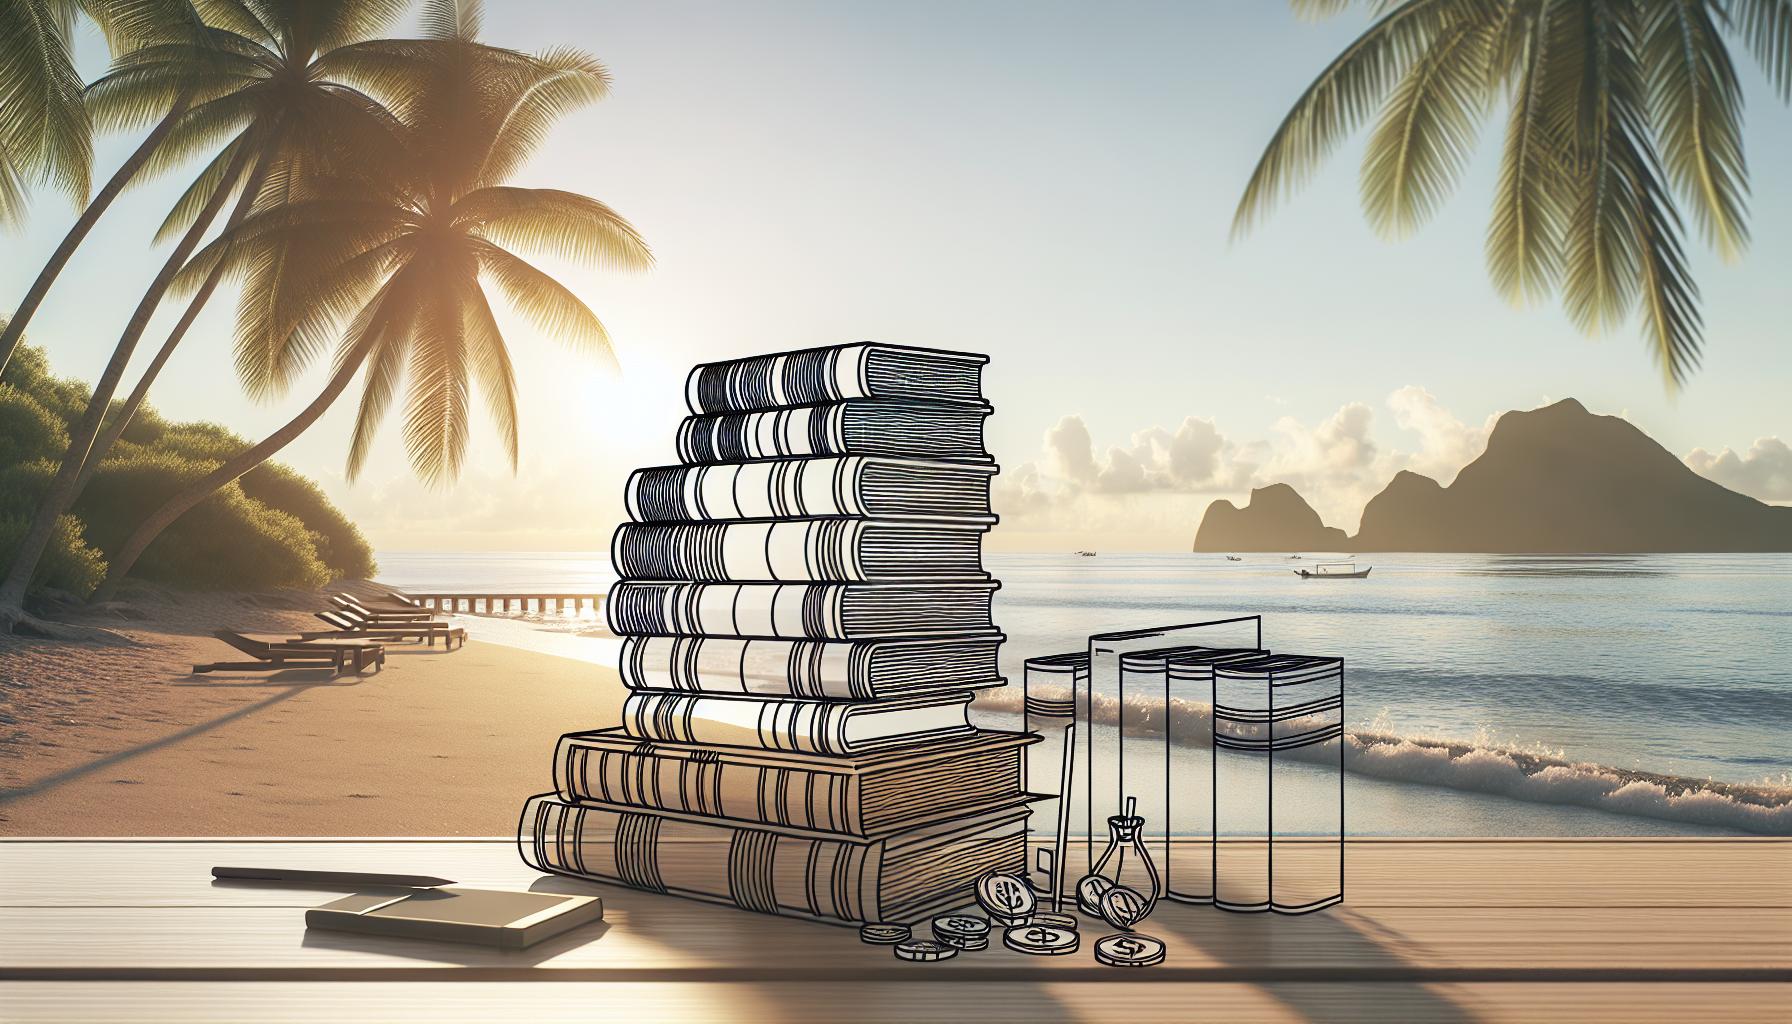 Lifestyle The 8 Best Digital Nomad Books (Must Read) ReallyRemoteWorker Discover the top books recommended for digital nomads! Our guide covers essential reads on financial independence, personal growth, and online business strategies. Gain insights from authors like Robert Kiyosaki, MJ DeMarco, Eckhart Tolle, and Gary Vaynerchuk to master the nomadic lifestyle.